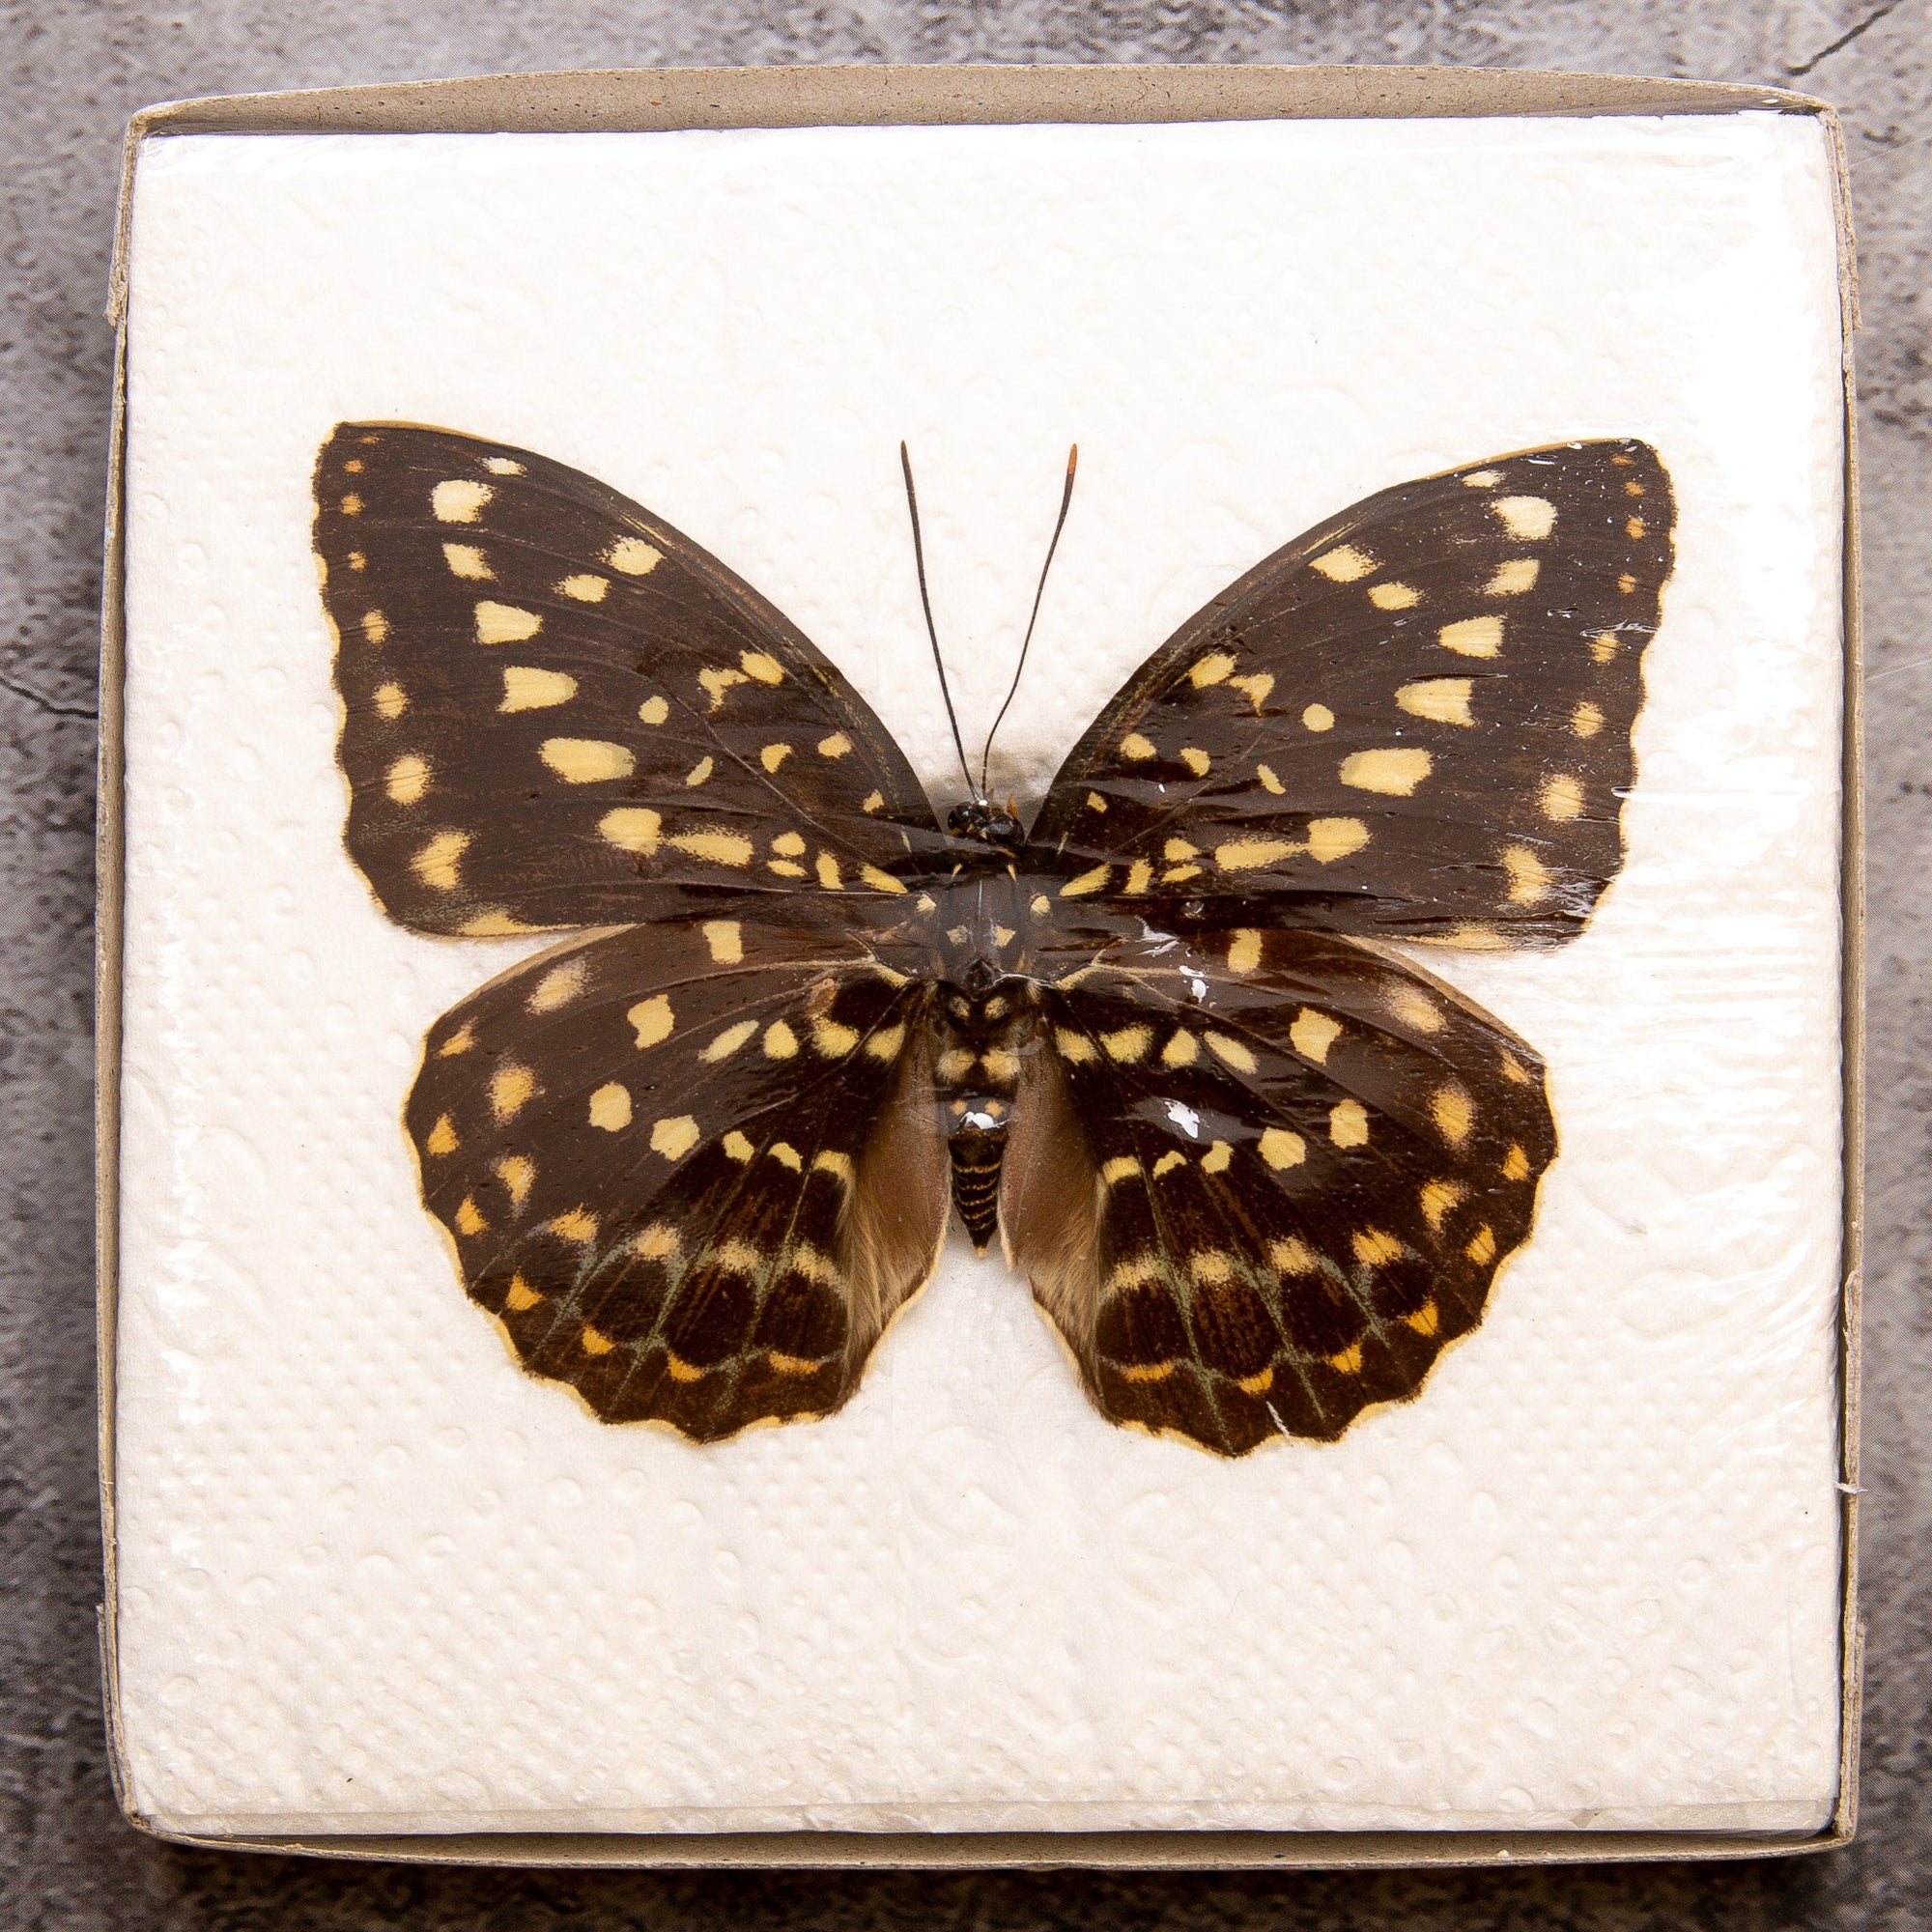 Pack of 2 Common Archduke Butterflies (Lexias pardalis) WINGS-SPREAD, Ethically Sourced Preserved Specimens for Collecting & Art